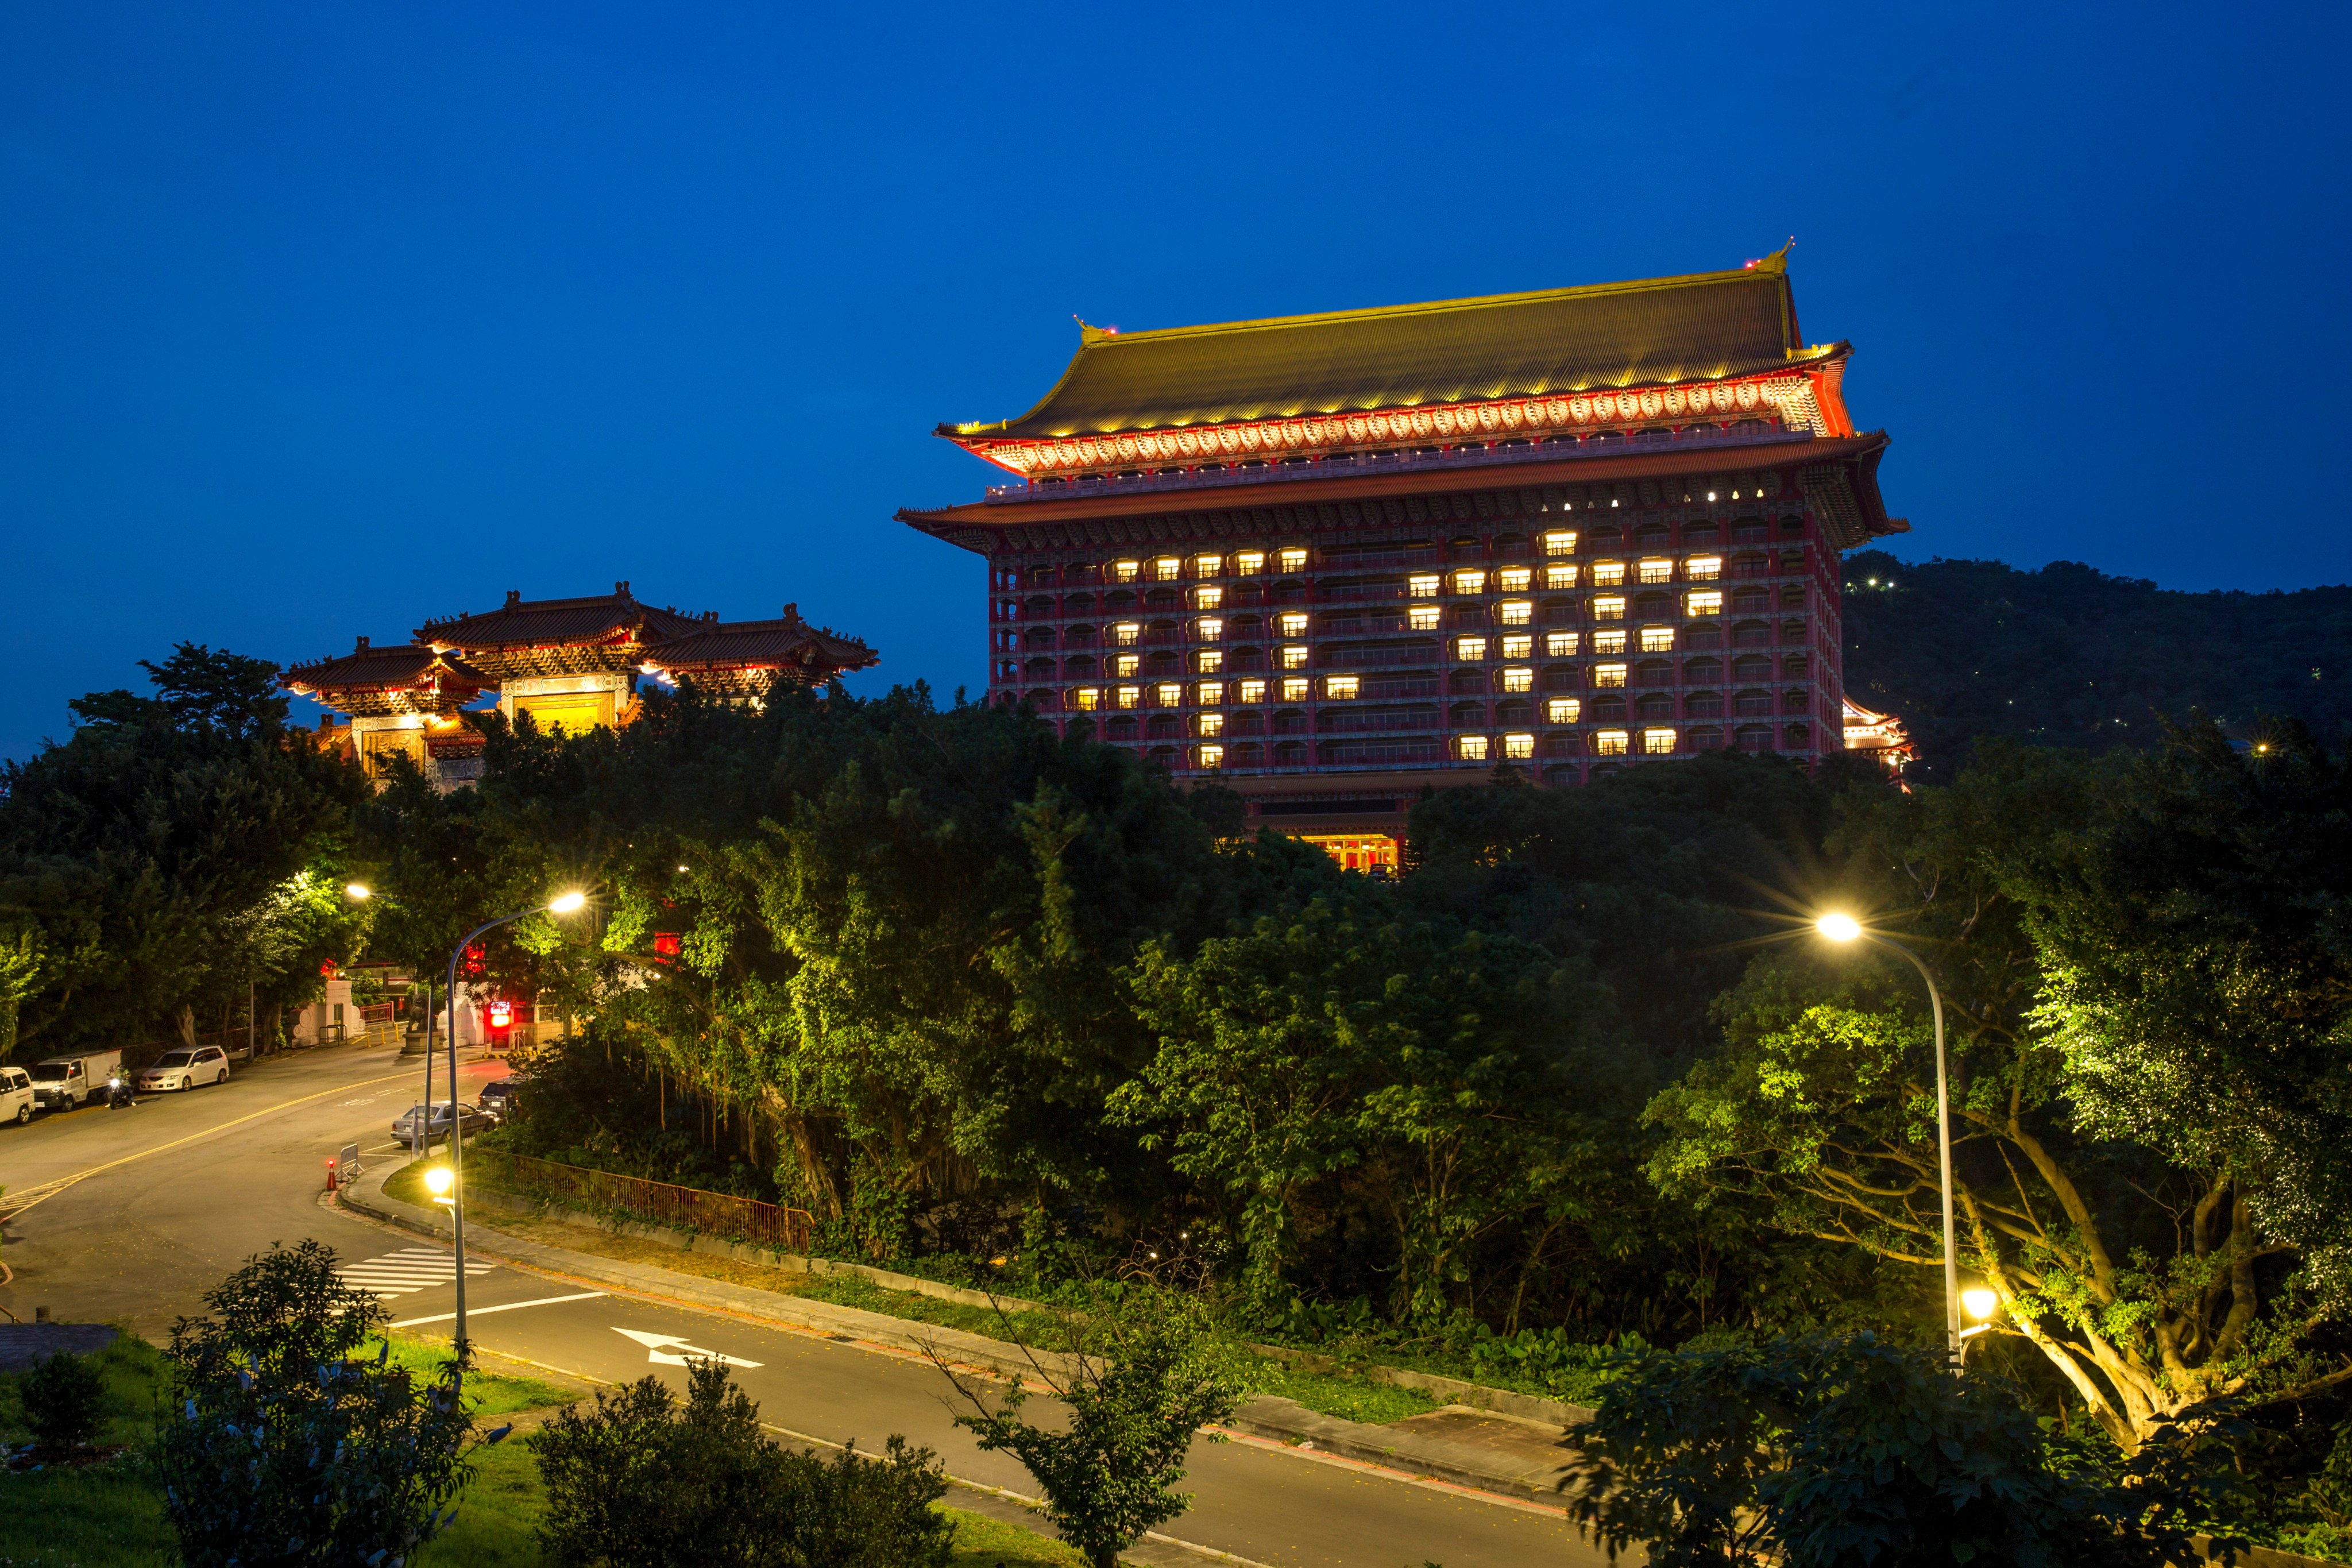 The Chinese characters for “peace” are seen at The Grand Hotel Taipei in May 2021. Photo: CNS